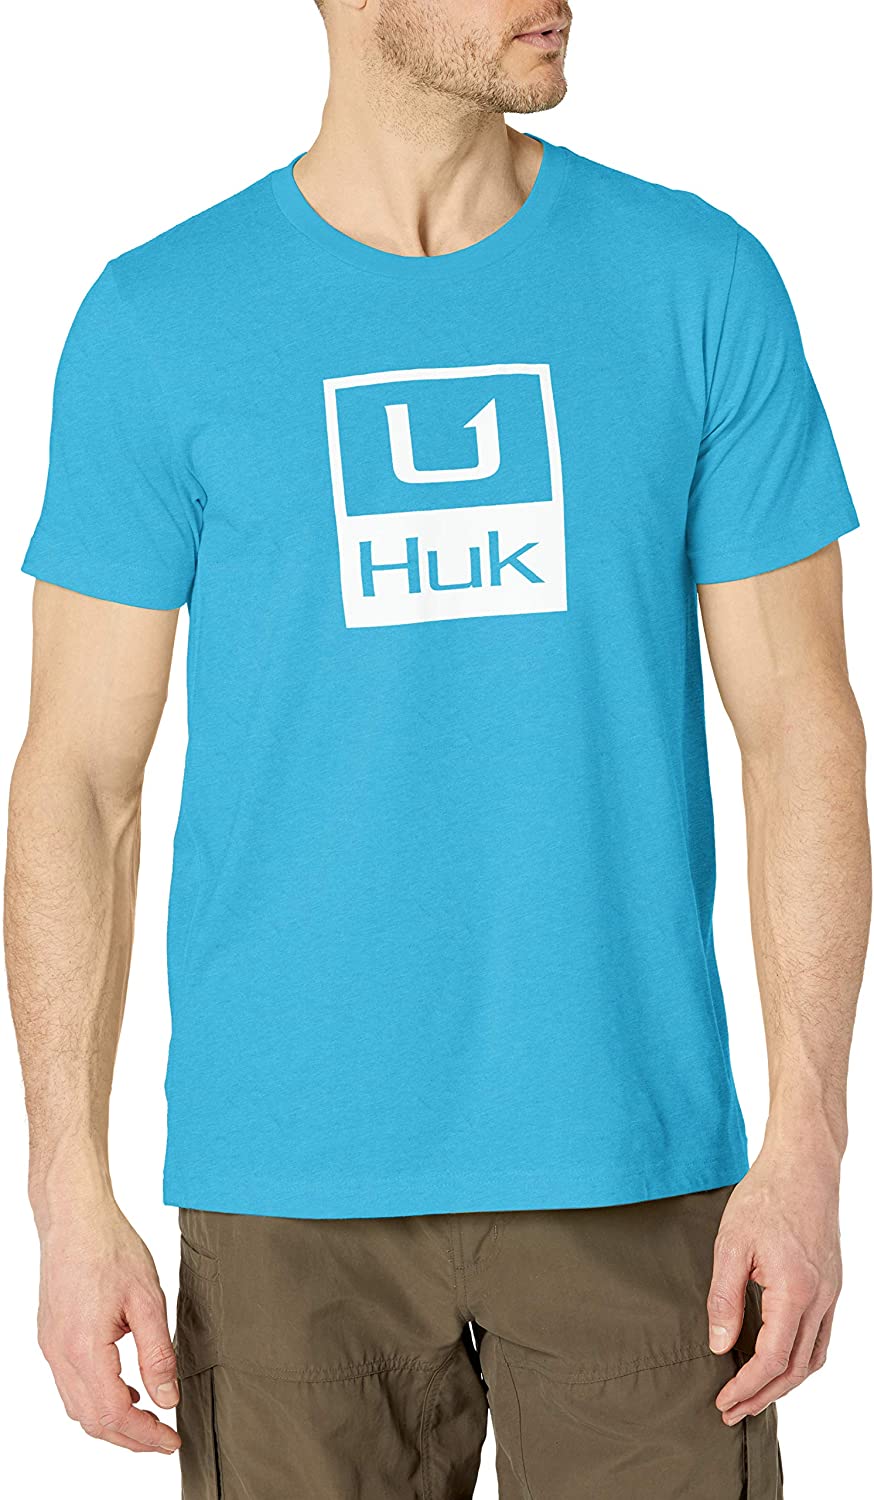 Men's Huk Huk'd Up Performance Tee in Blue Radiance Heather from the front